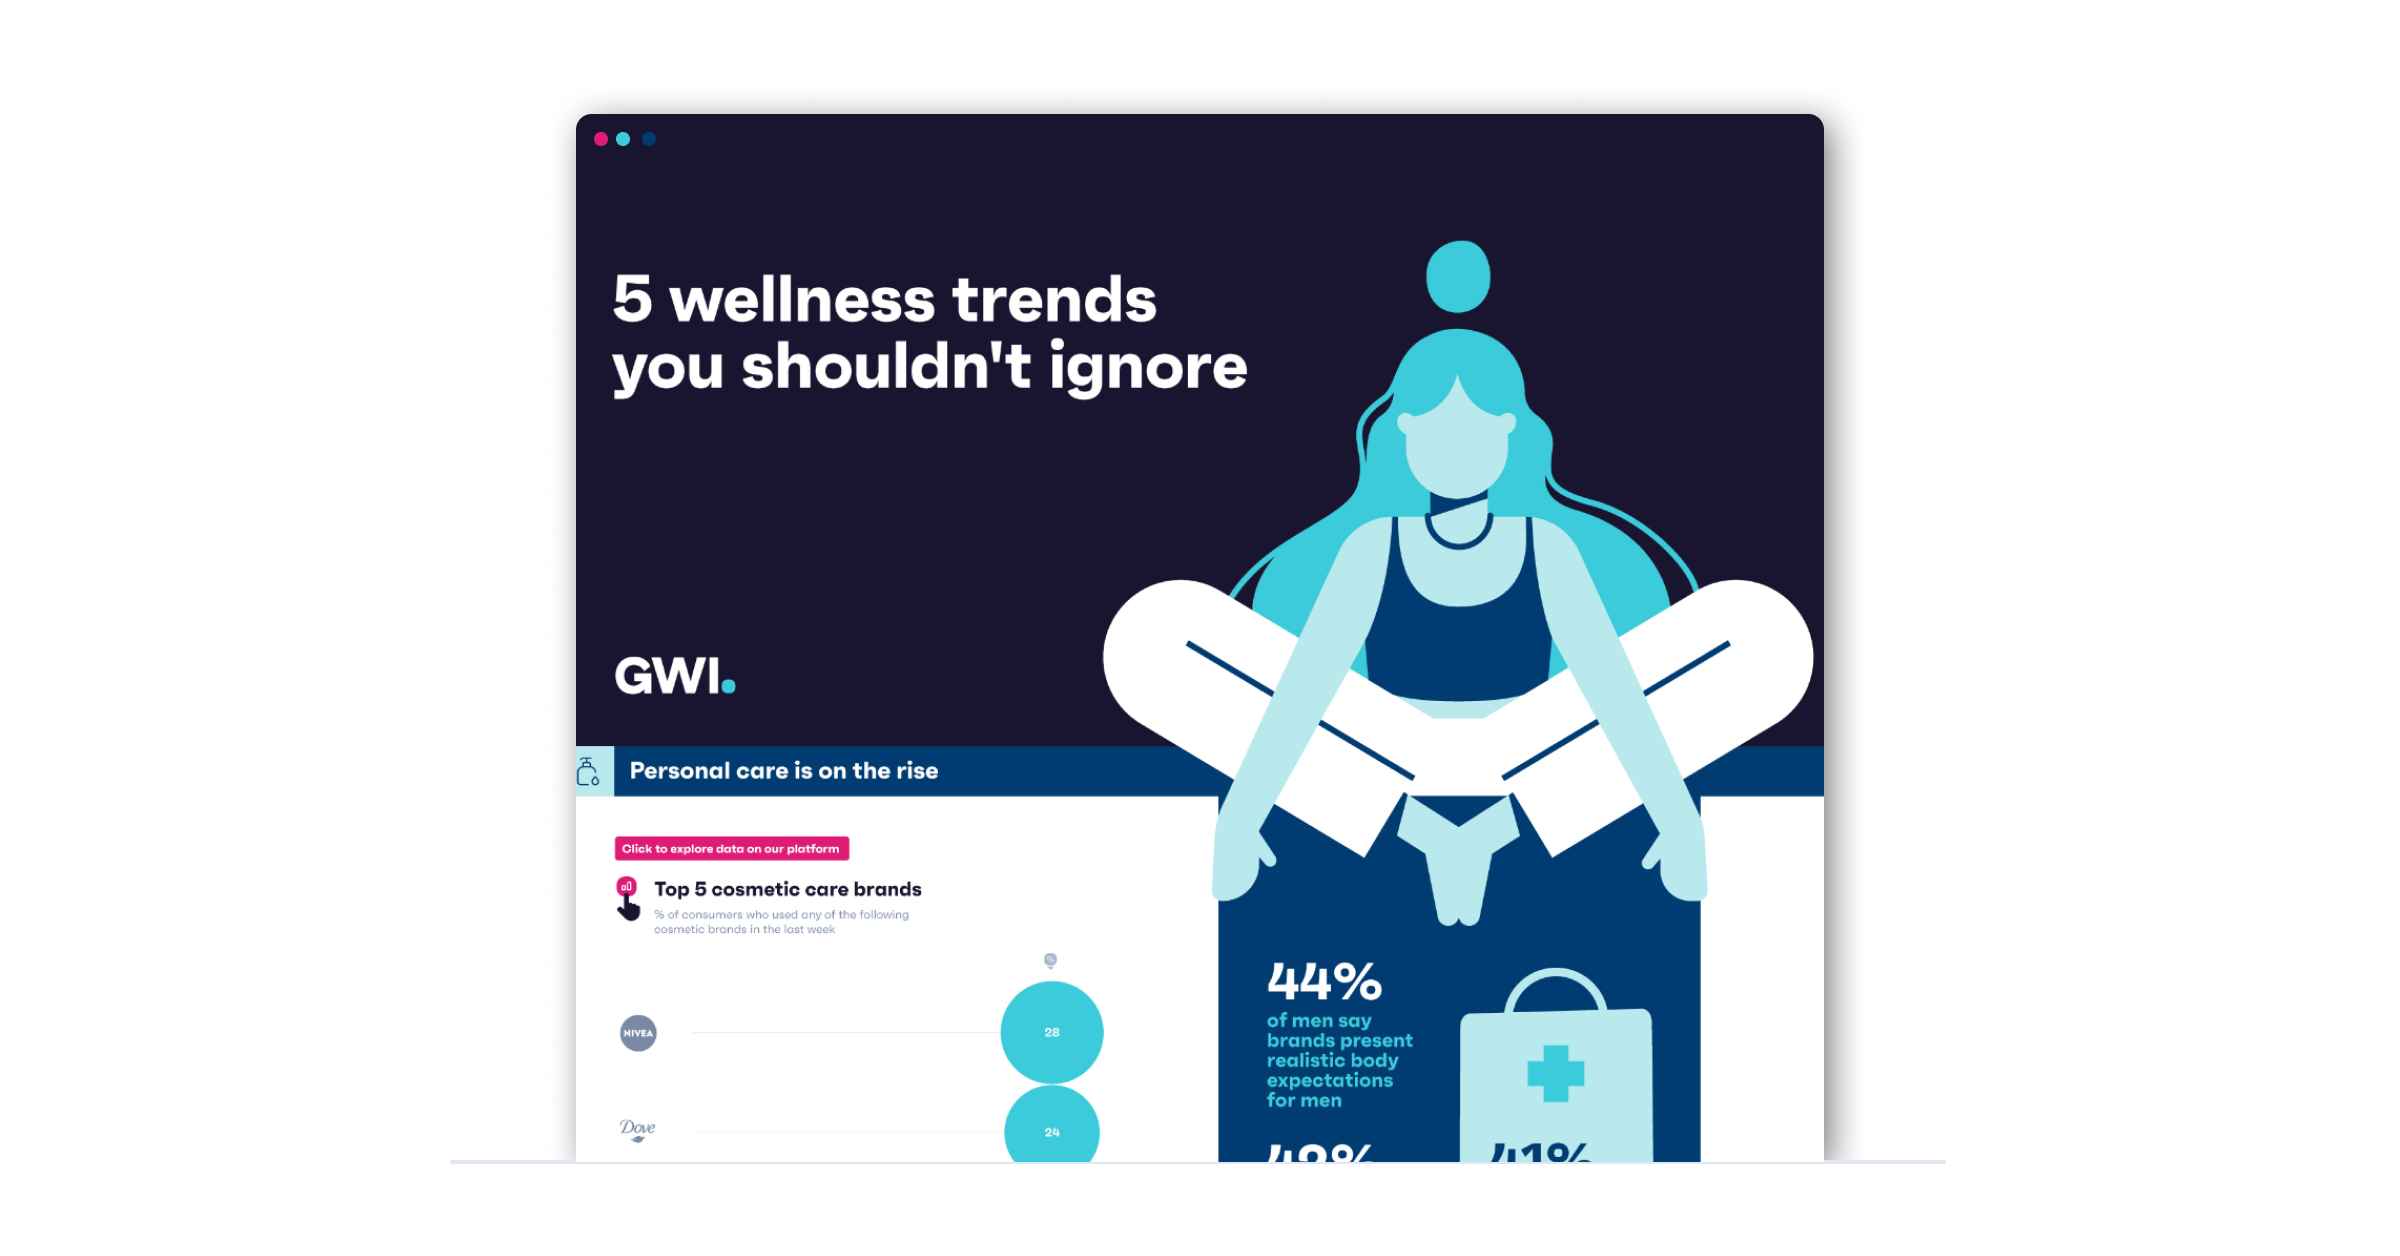 5 wellness trends_Infographic preview 1200 x 628